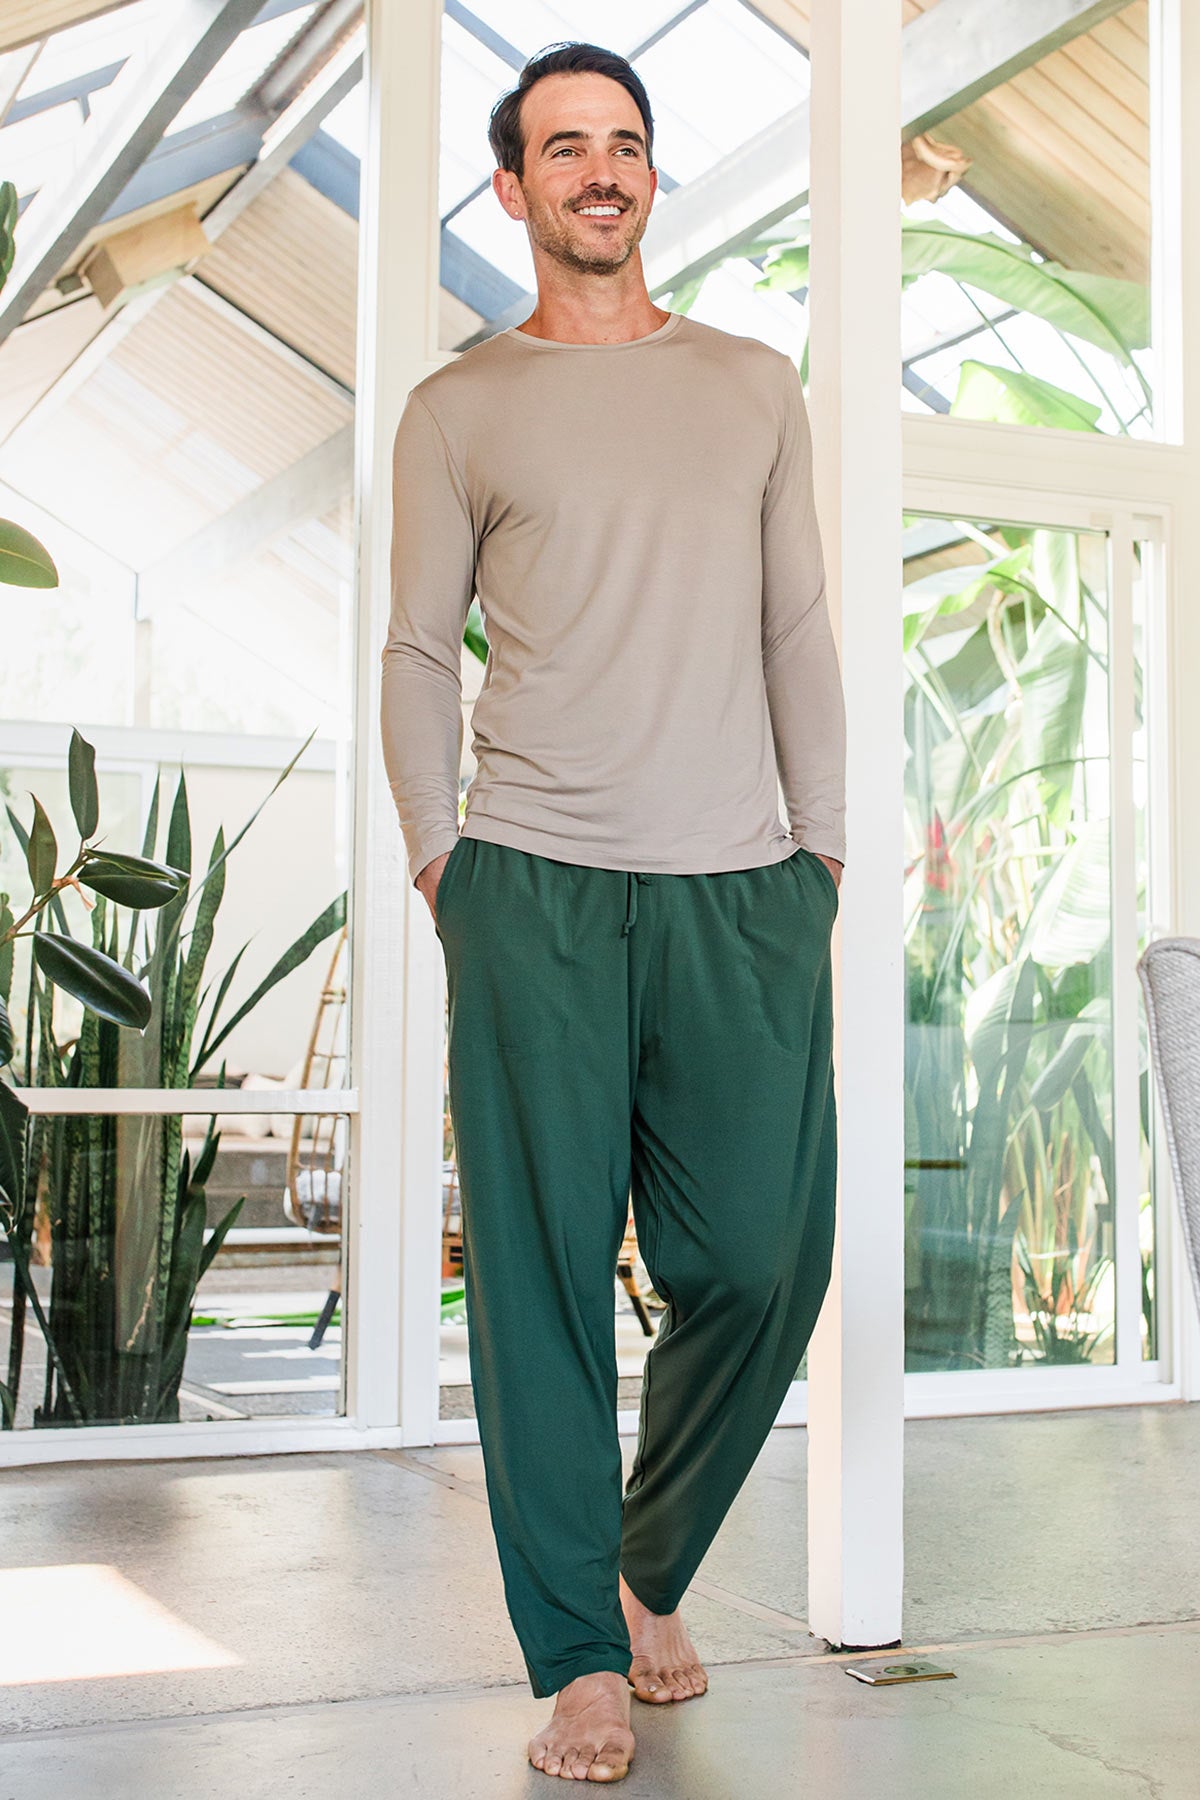 A man walking forward with both hands in his pockets and a smile on his face, wearing Yala Men's Hayden ButterSoft Bamboo Lounge Pants in Evergreem